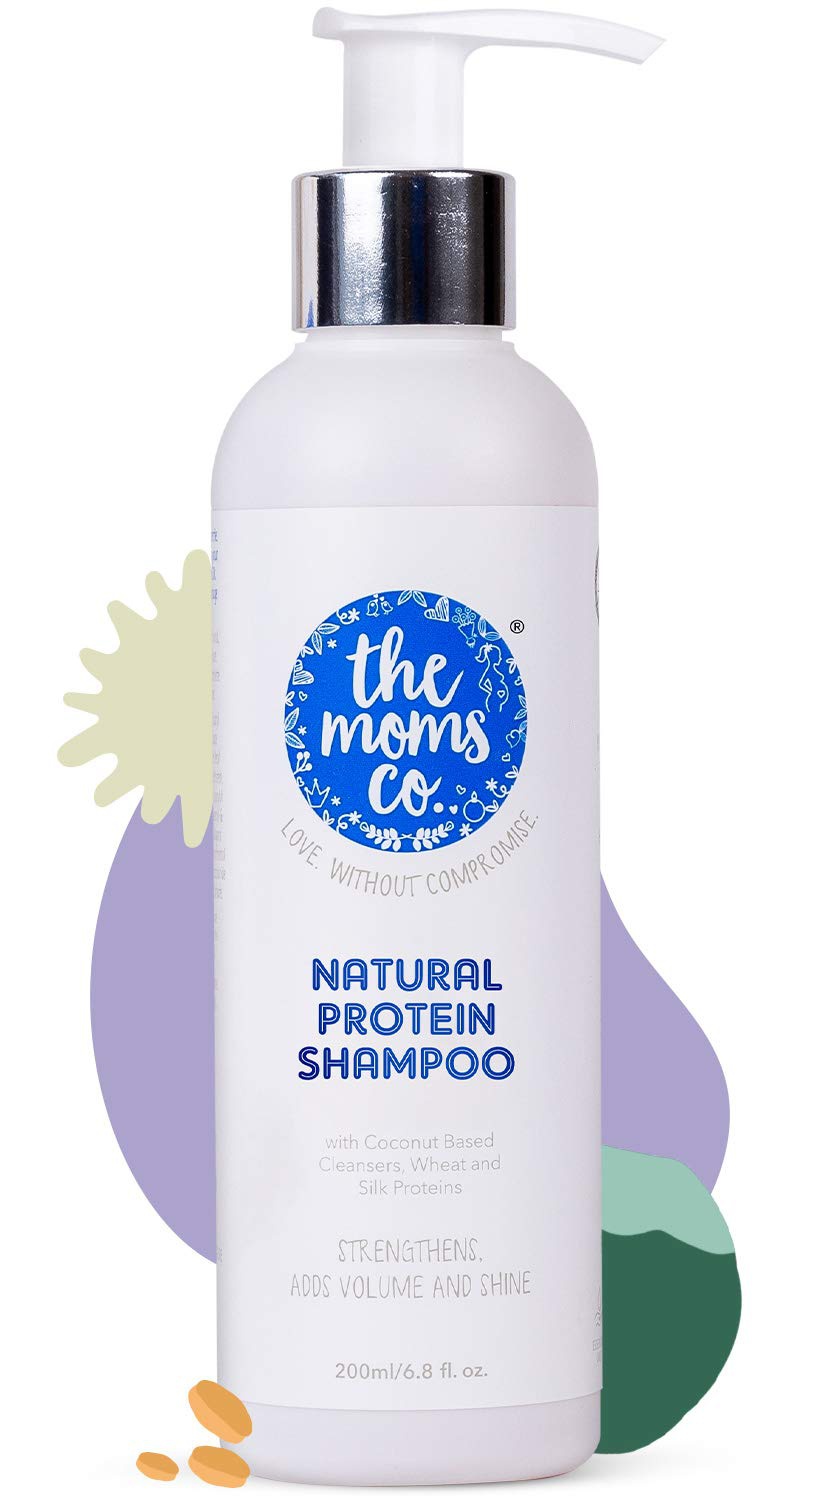 The Mom's Co. Natural Protein Shampoo